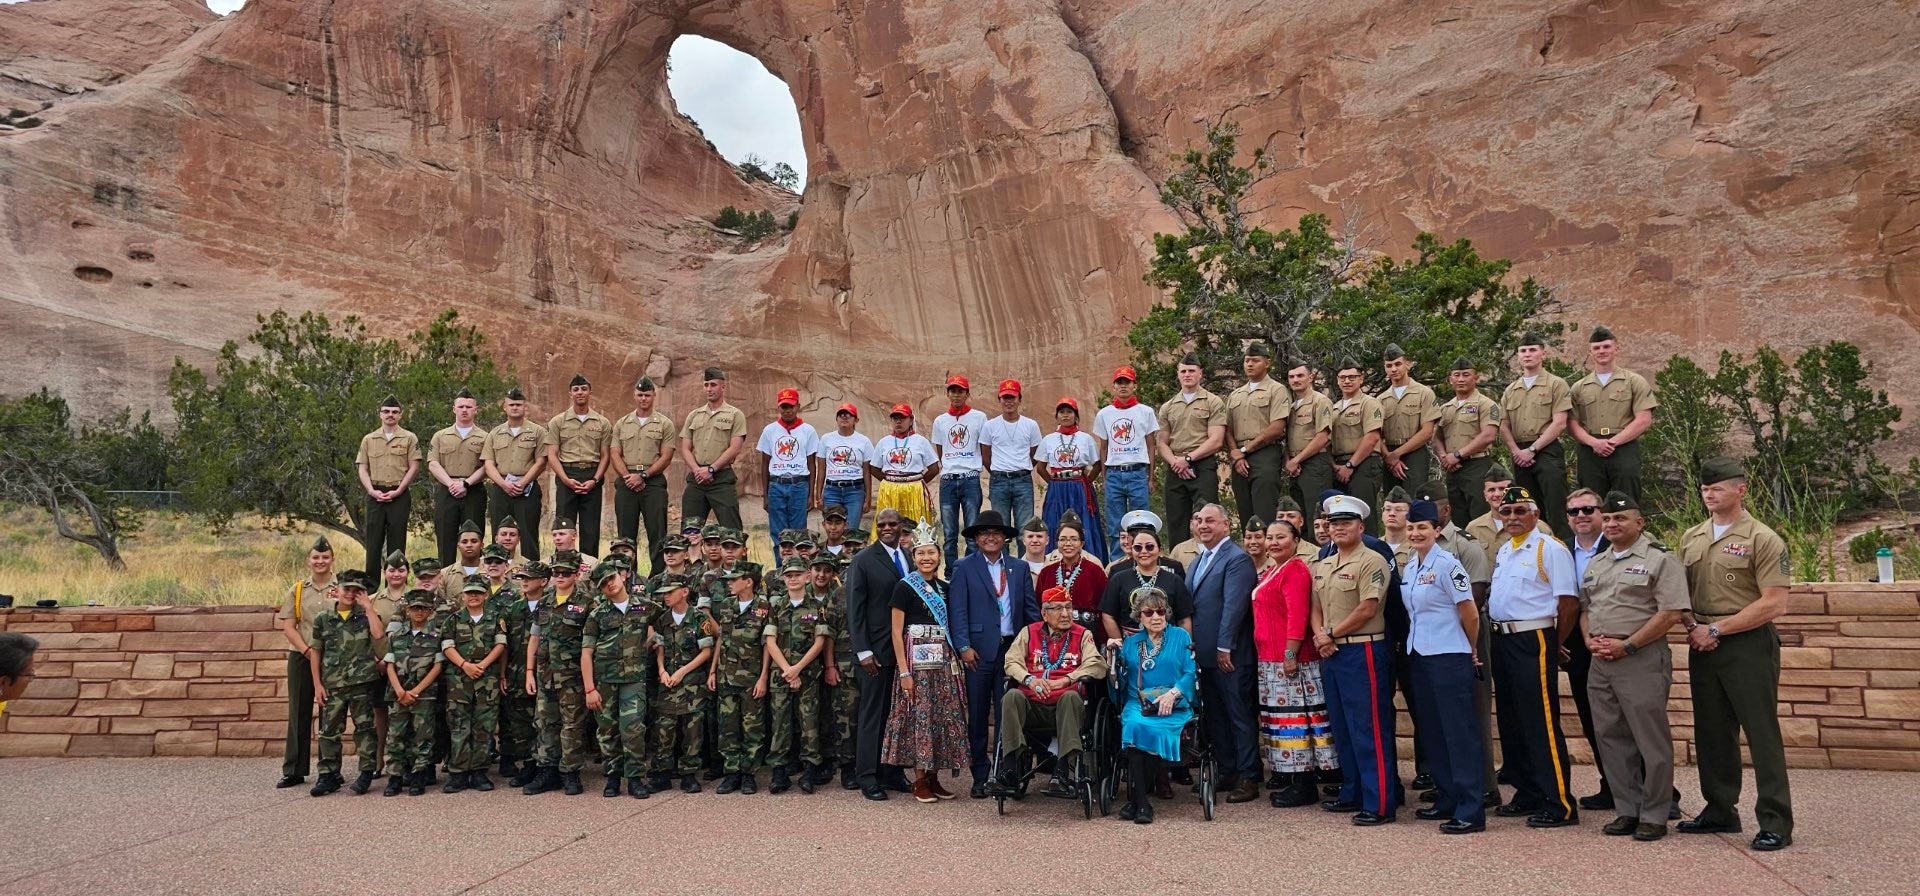 Group photo after the Navajo Code Talker’s Award Ceremony. Pictured: Master Gunnery Sgt. Clayton Hill; NCM Director Vince Houghton; USD (Intelligence & Security) Ronald Moultrie; USD (Personnel & Readiness) Gilbert Cisneros; DOD personnel; Marine Corps Junior ROTC; Navajo dignitaries; code talker Peter McDonald.